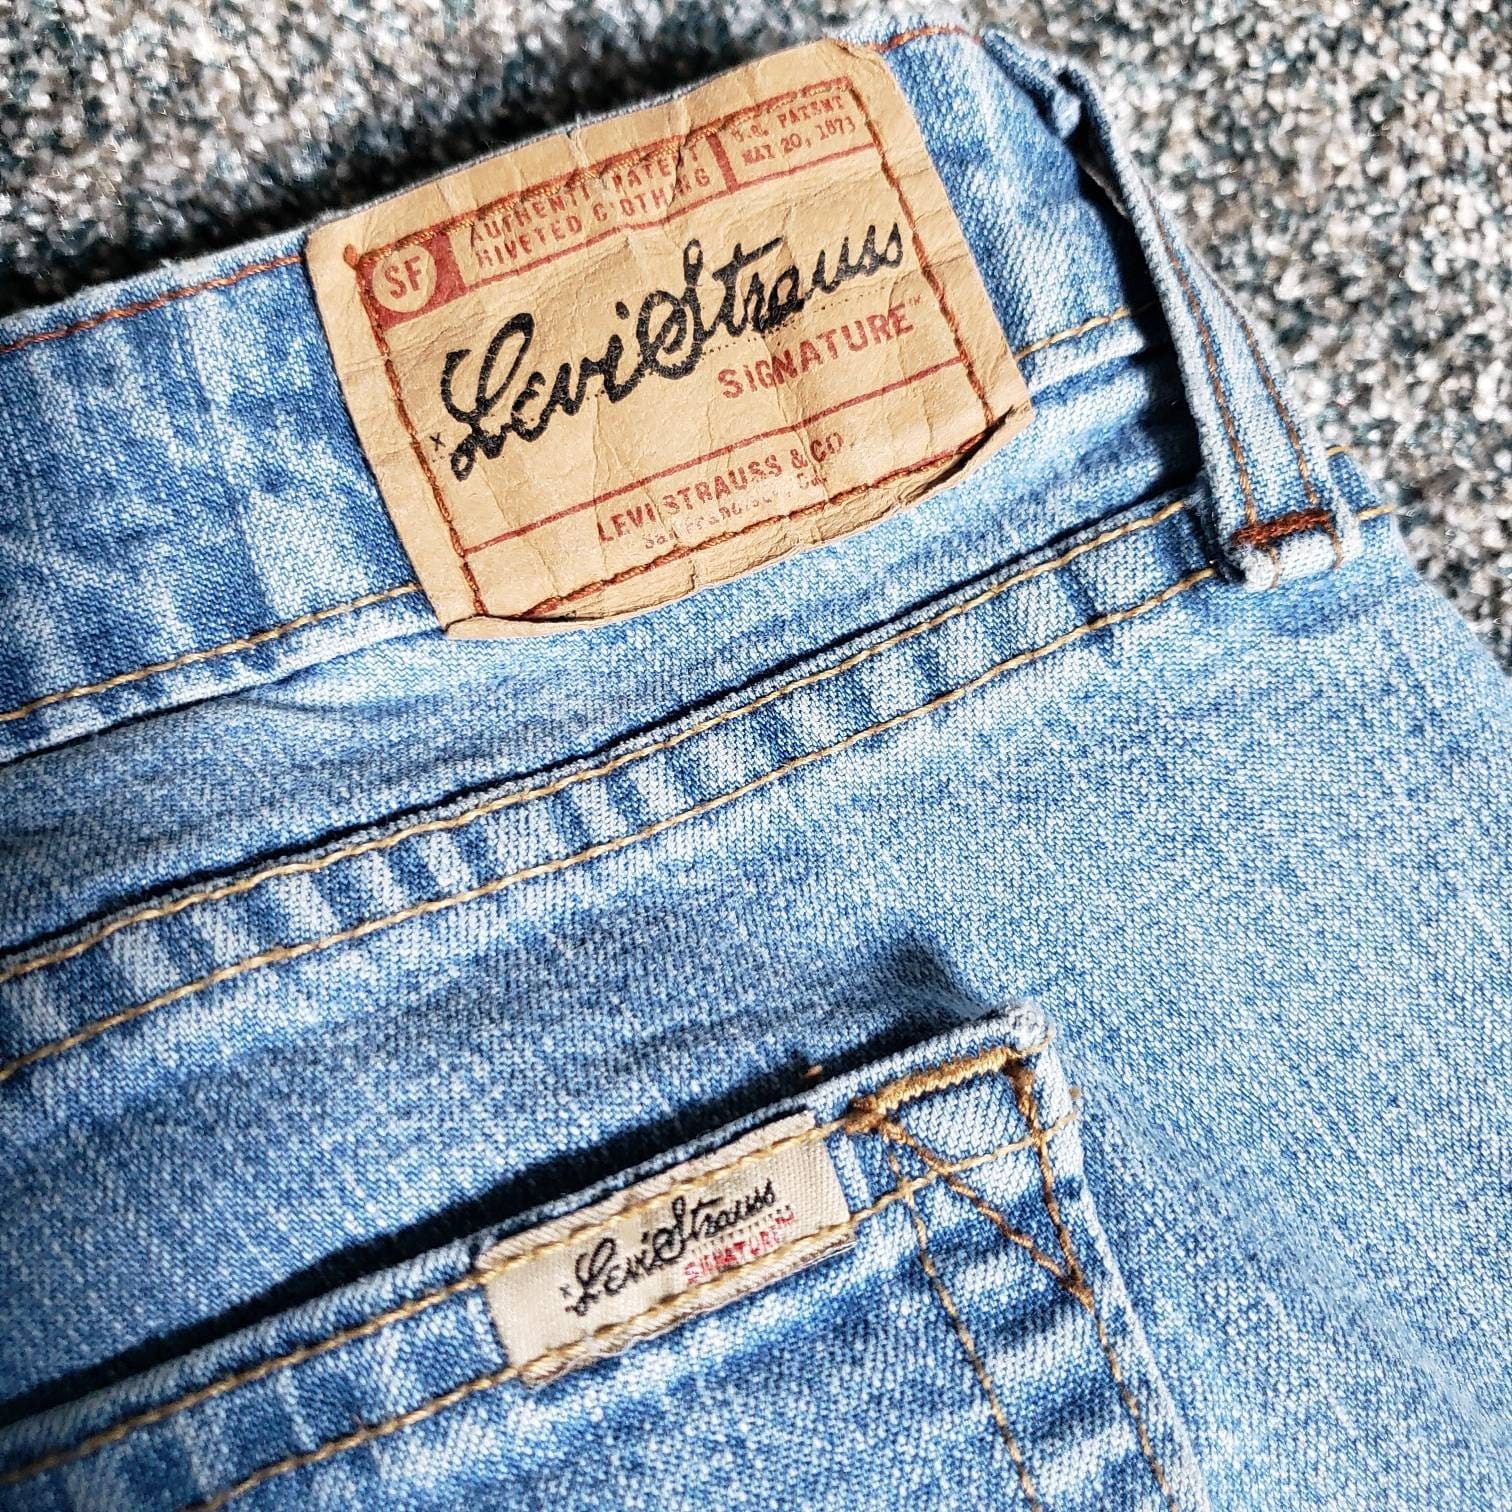 No More Levi Strauss Jeans For Russians. Sales Suspended